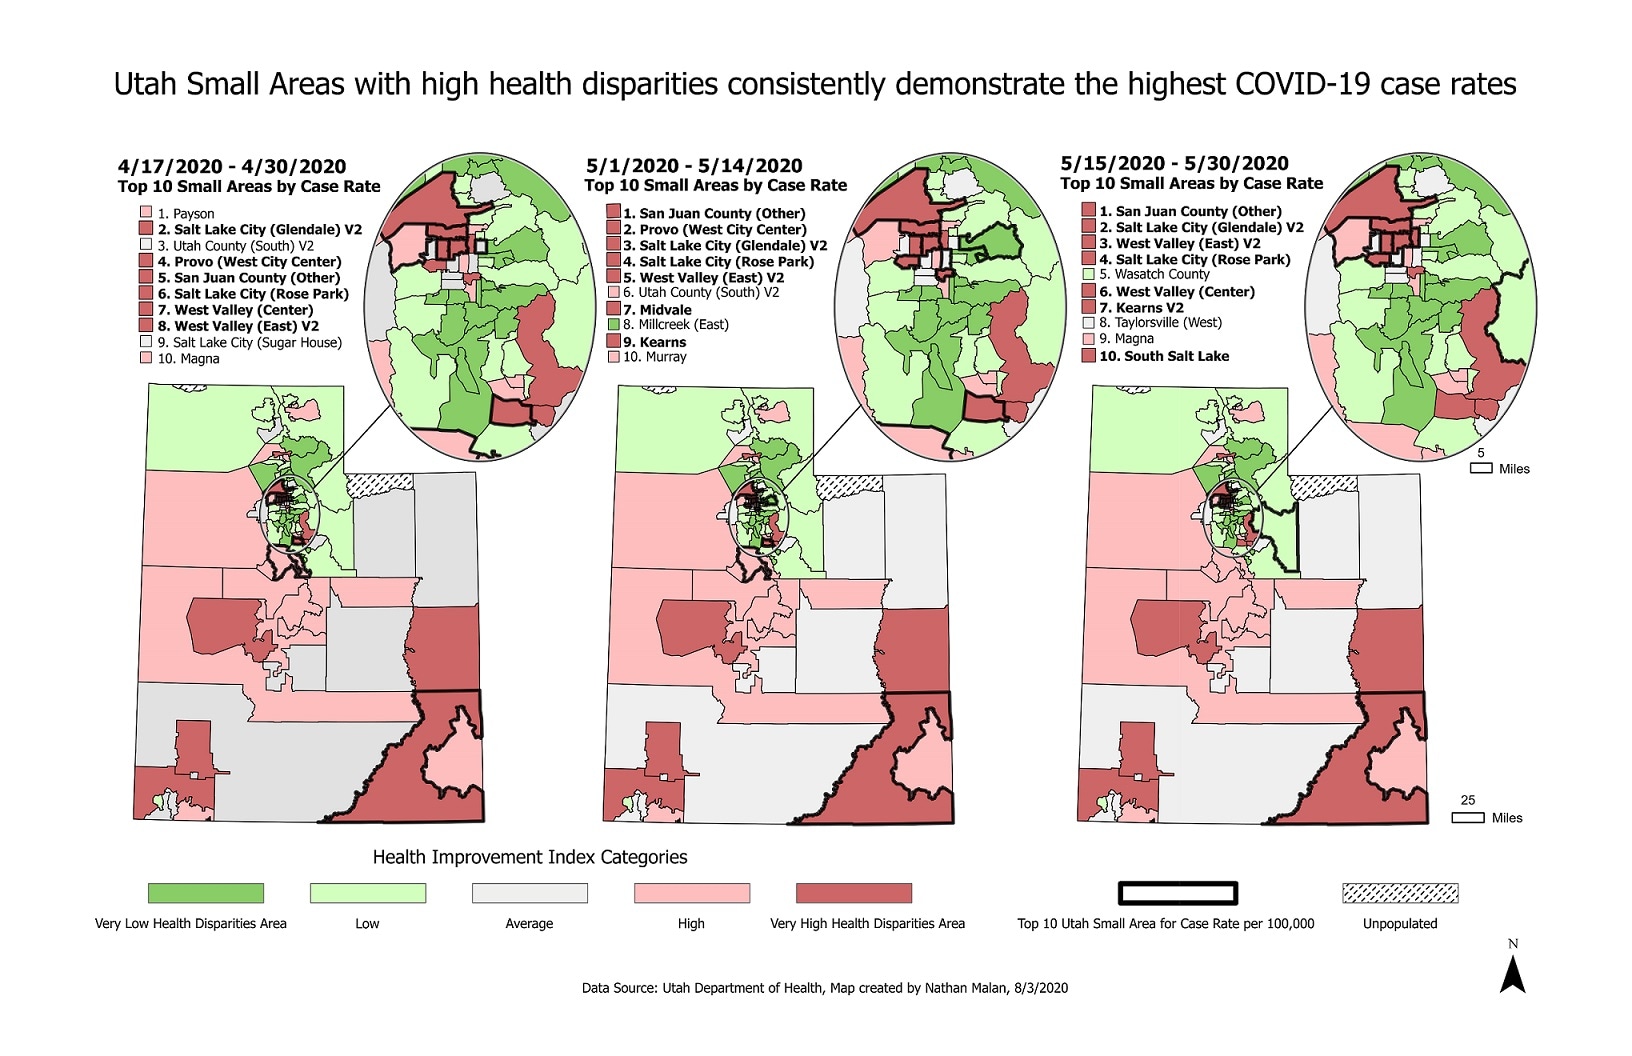 Utah Small Areas with high health disparities consistently demonstrate the highest COVID-19 case rates